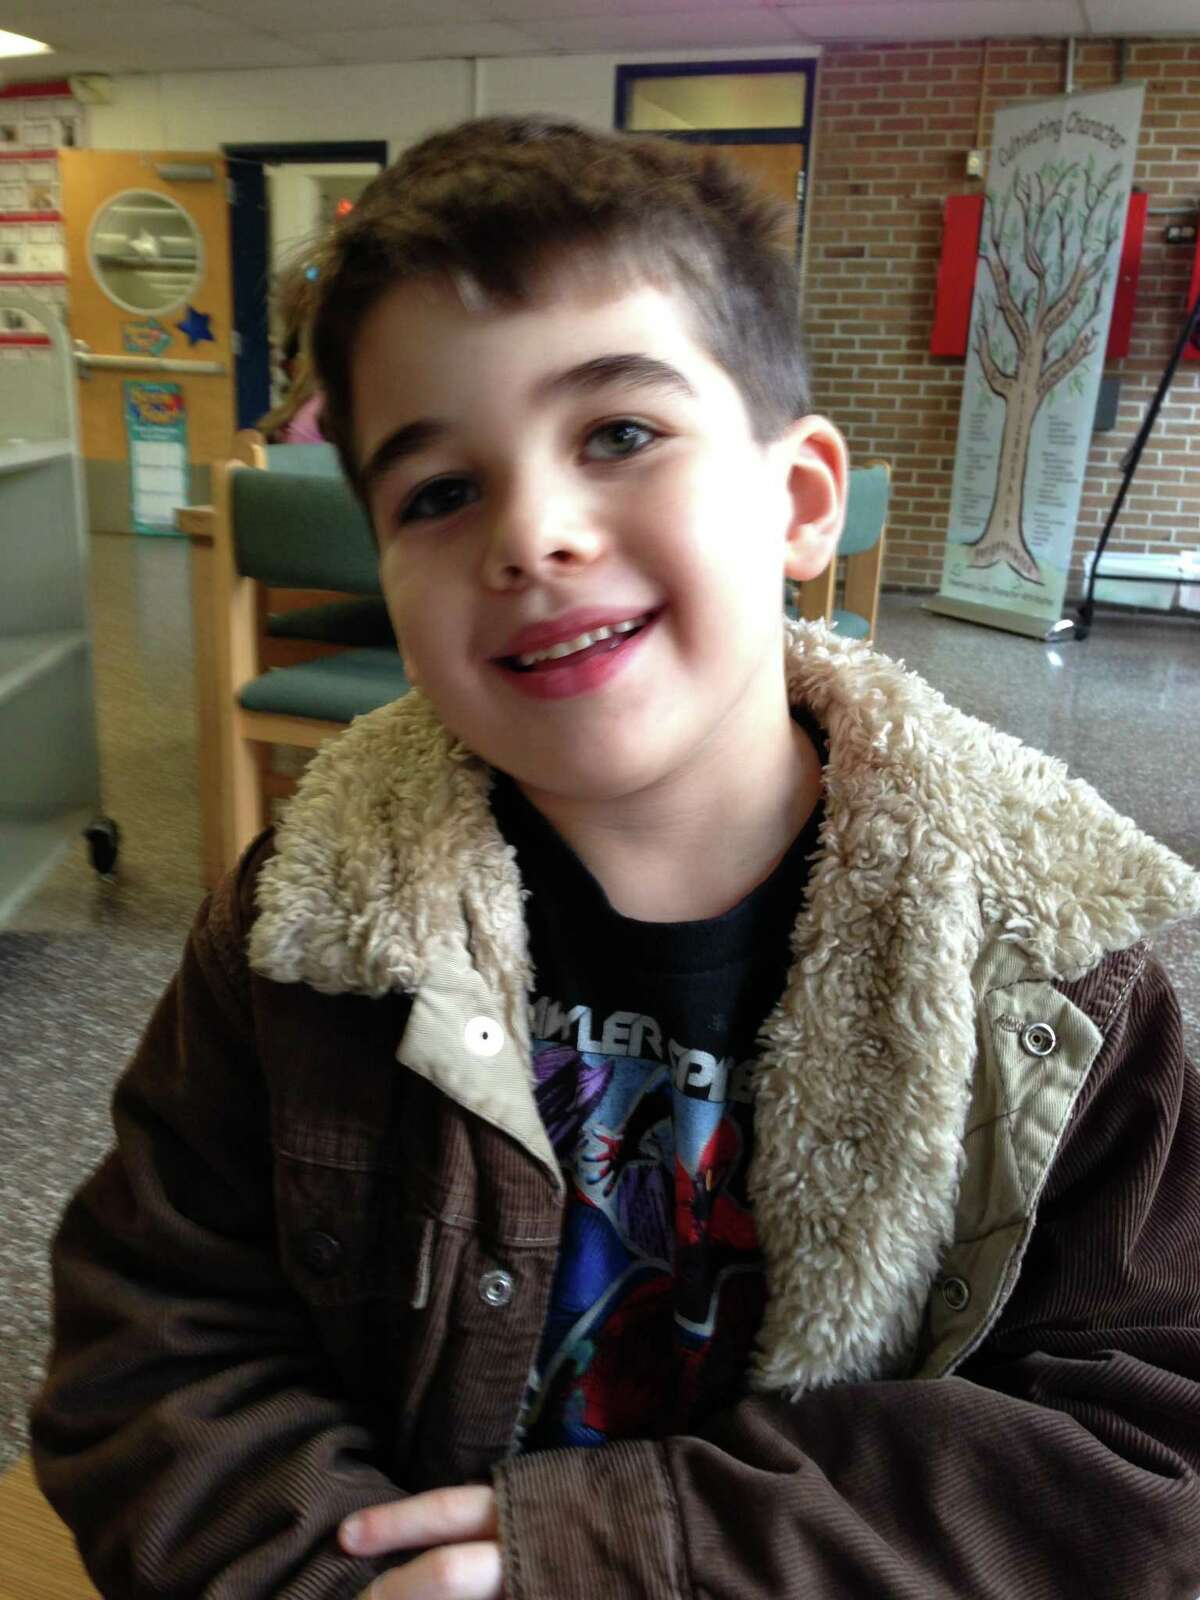  Noah Pozner, who was 6 years old, was the youngest of the Sandy Hook shooting victims on Dec. 14, 2012. (AP Photo/Family Photo)